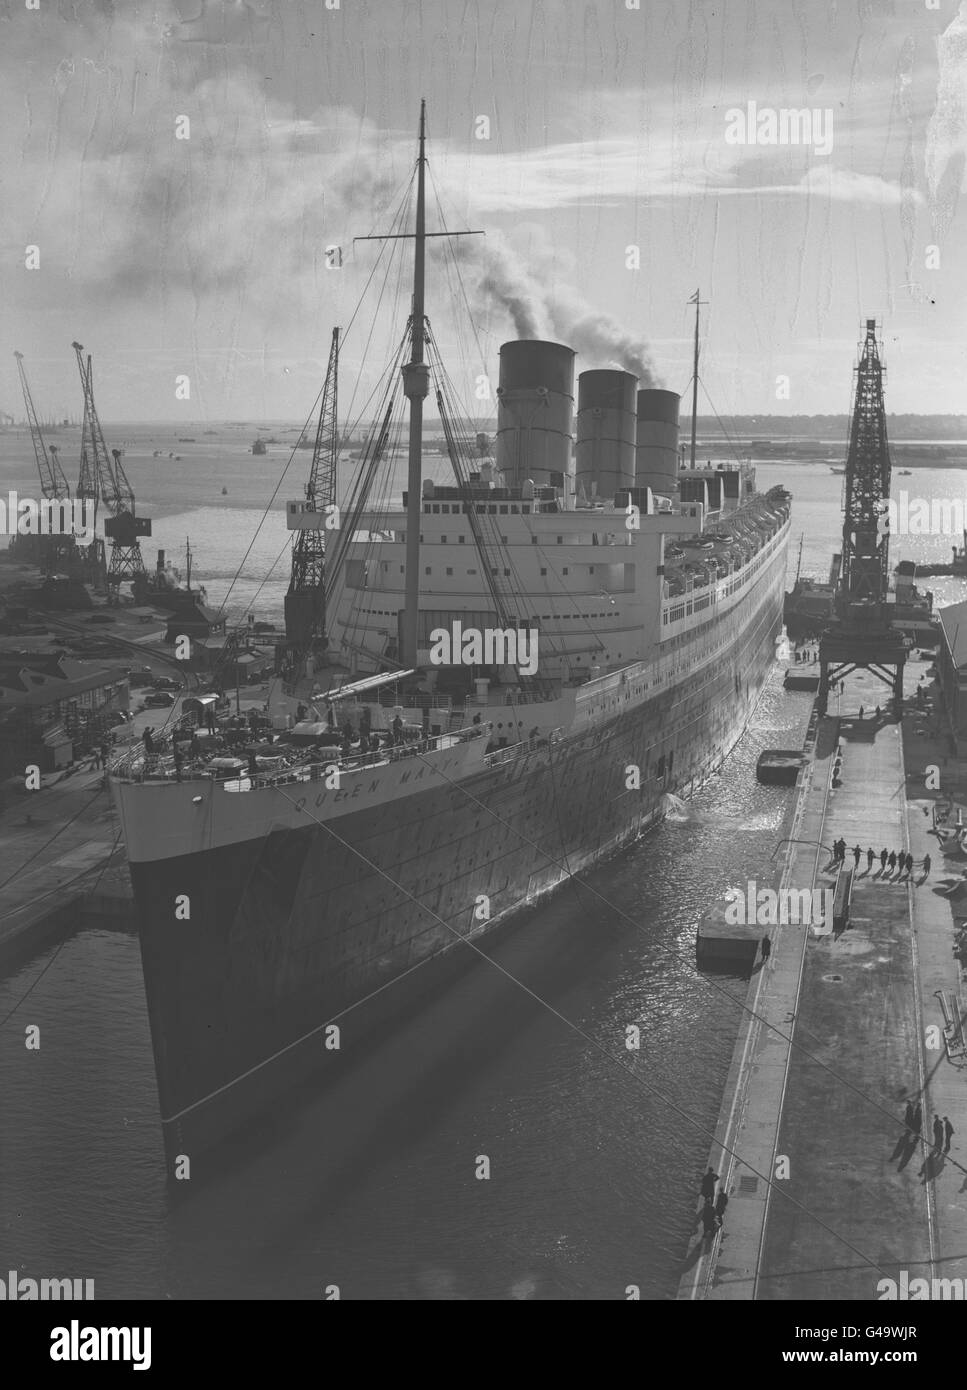 The 81,000 ton Cunard-White Star liner RMS Queen Mary moves in stately manner into the King George V dry dock in Southampton for her annual overhaul. Stock Photo